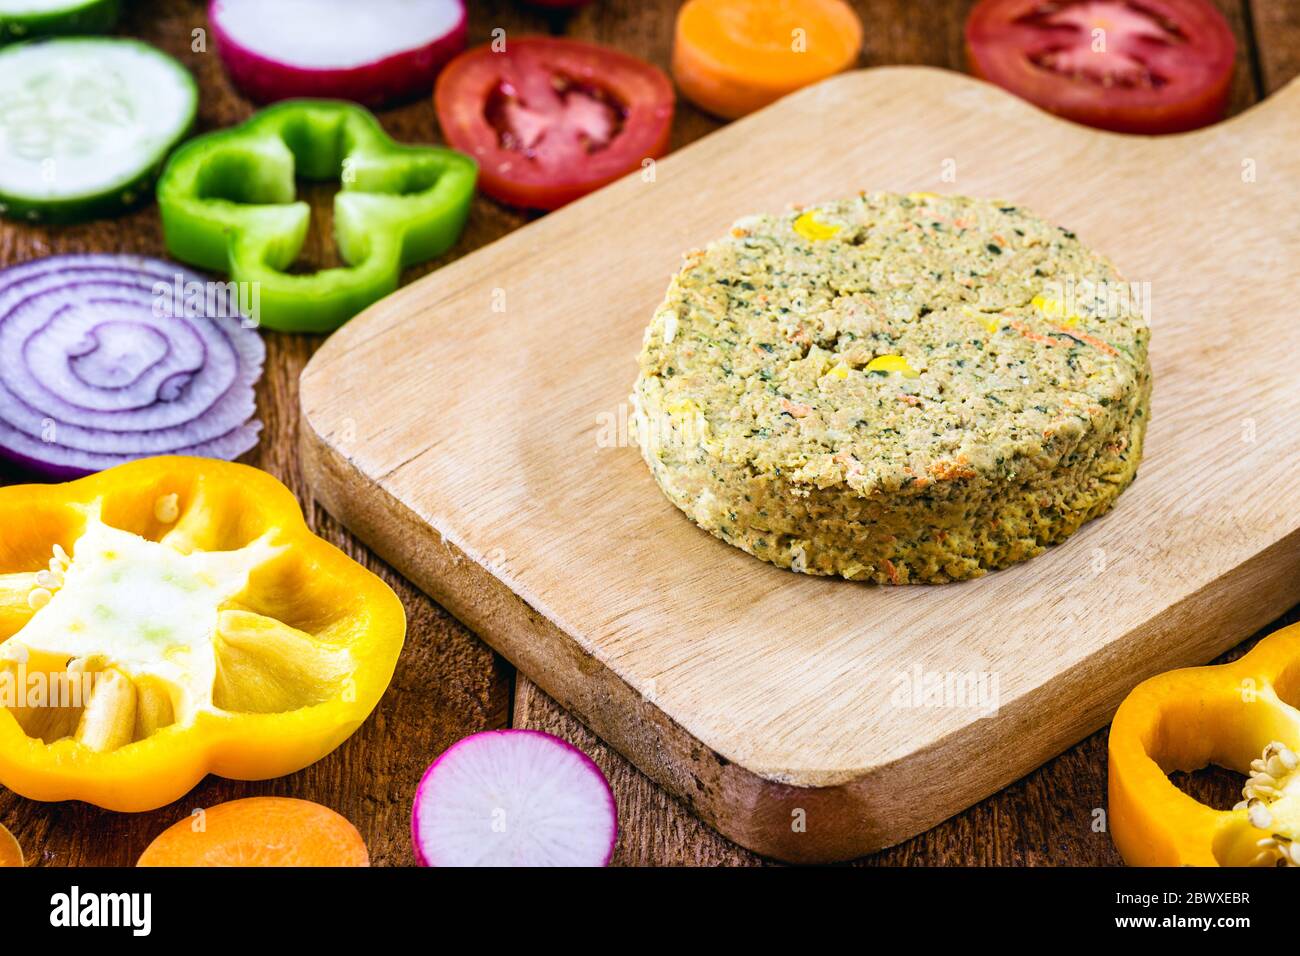 Vegan hamburger made without meat, without elements of animal origin, can be made of corn, potatoes, textured soy protein, legumes, tofu, mushrooms, c Stock Photo